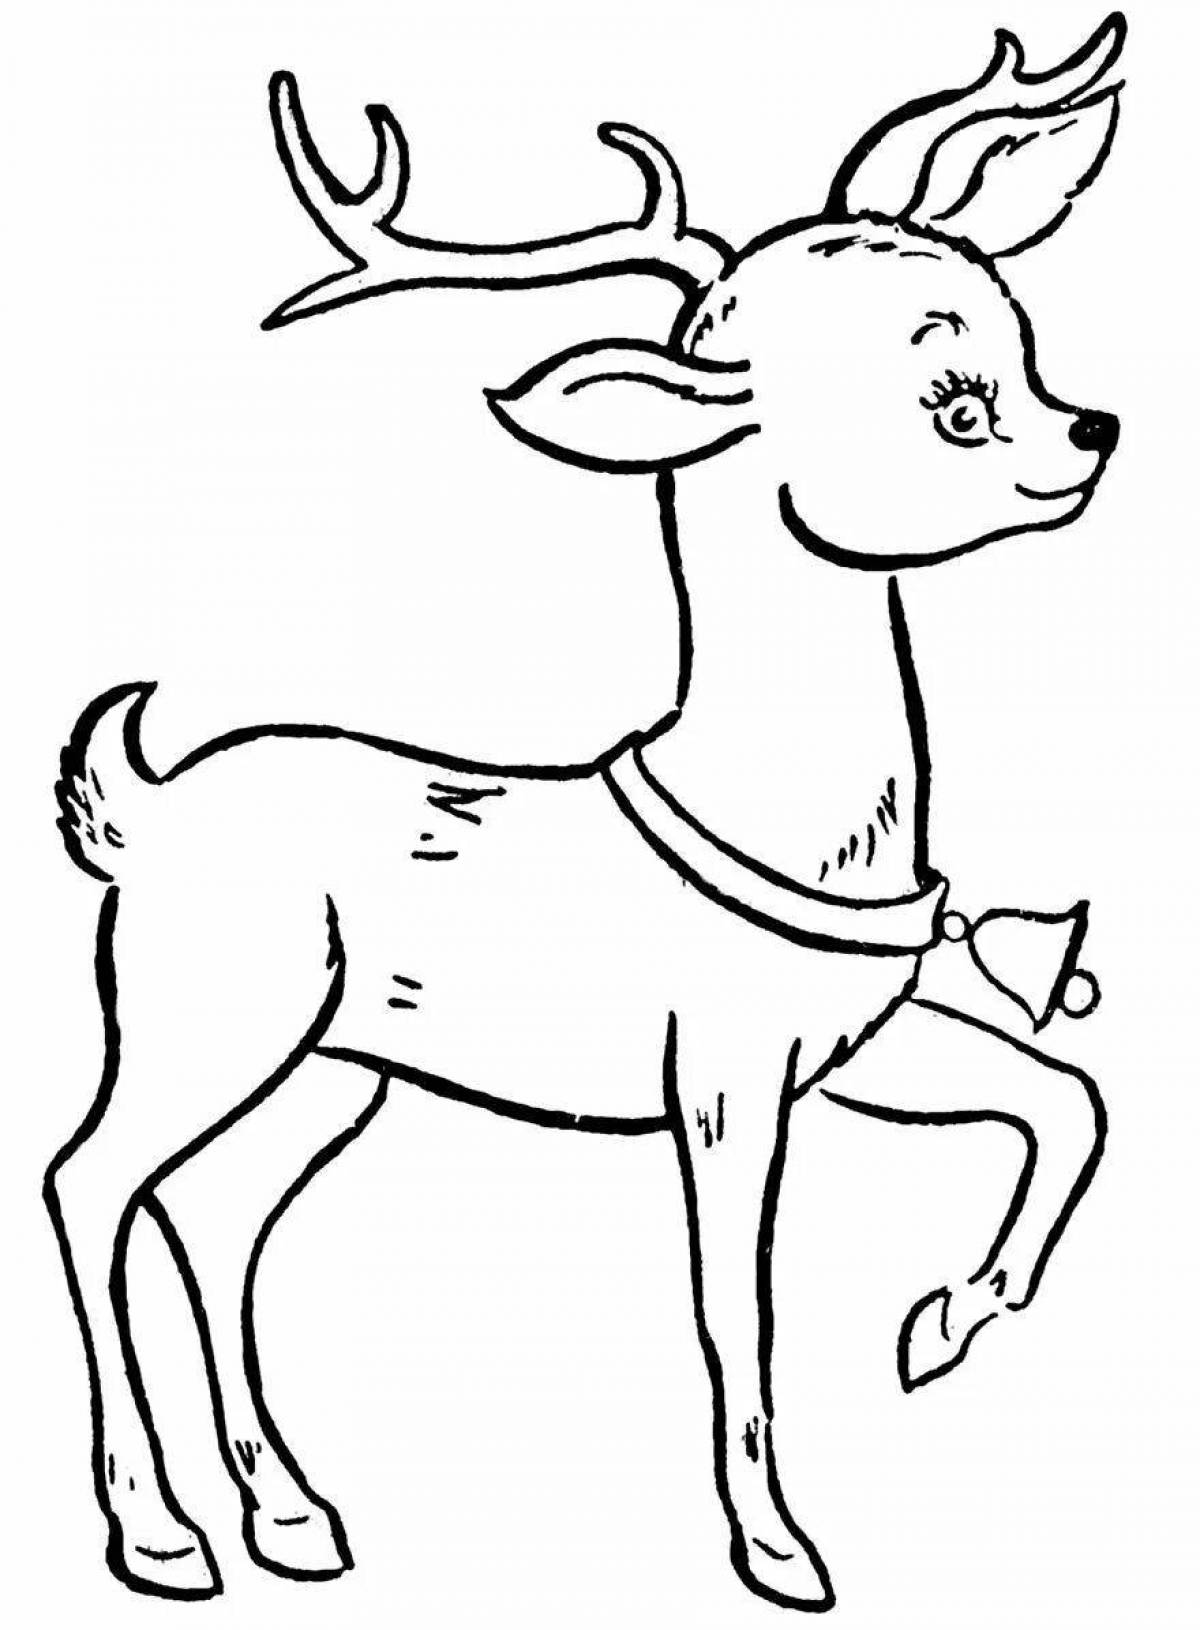 Adorable Christmas reindeer coloring book for kids